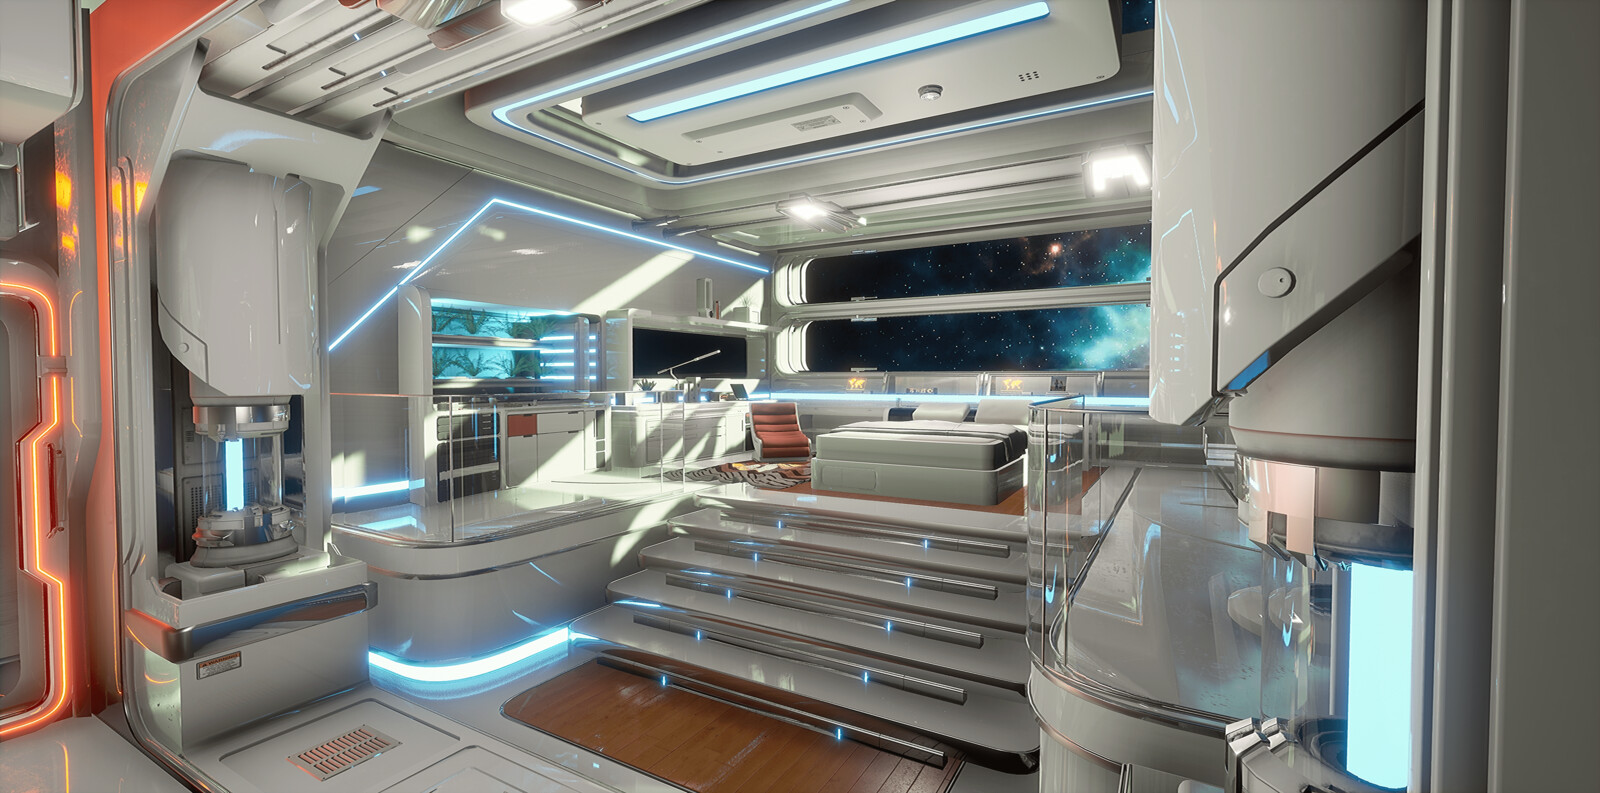 Sci-Fi Space Station - UNREAL ENGINE 4